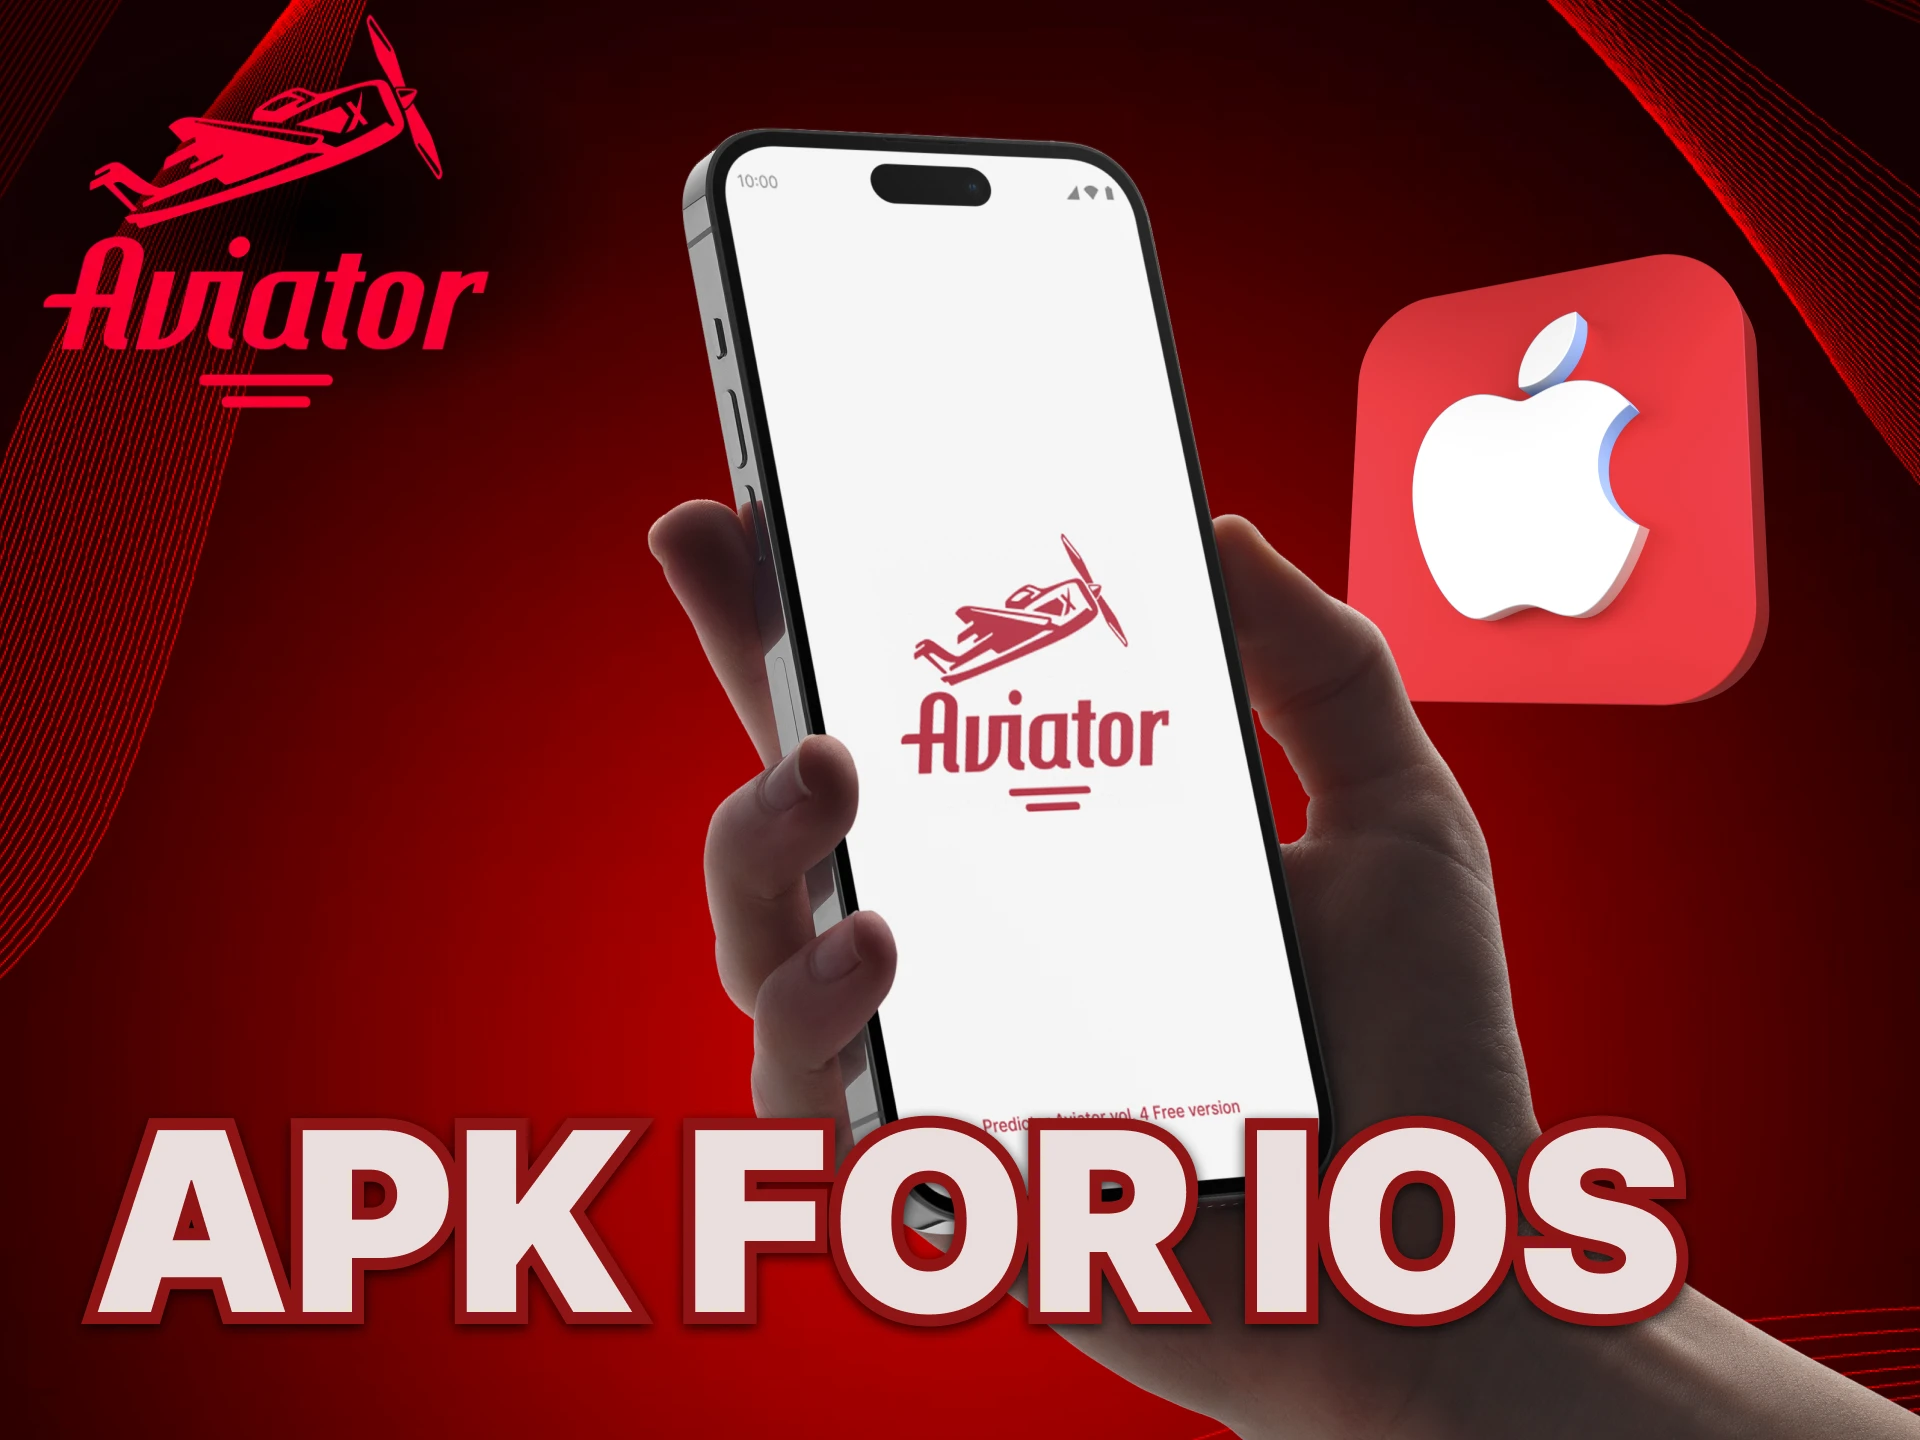 How to download the Aviator app on your ios phone.